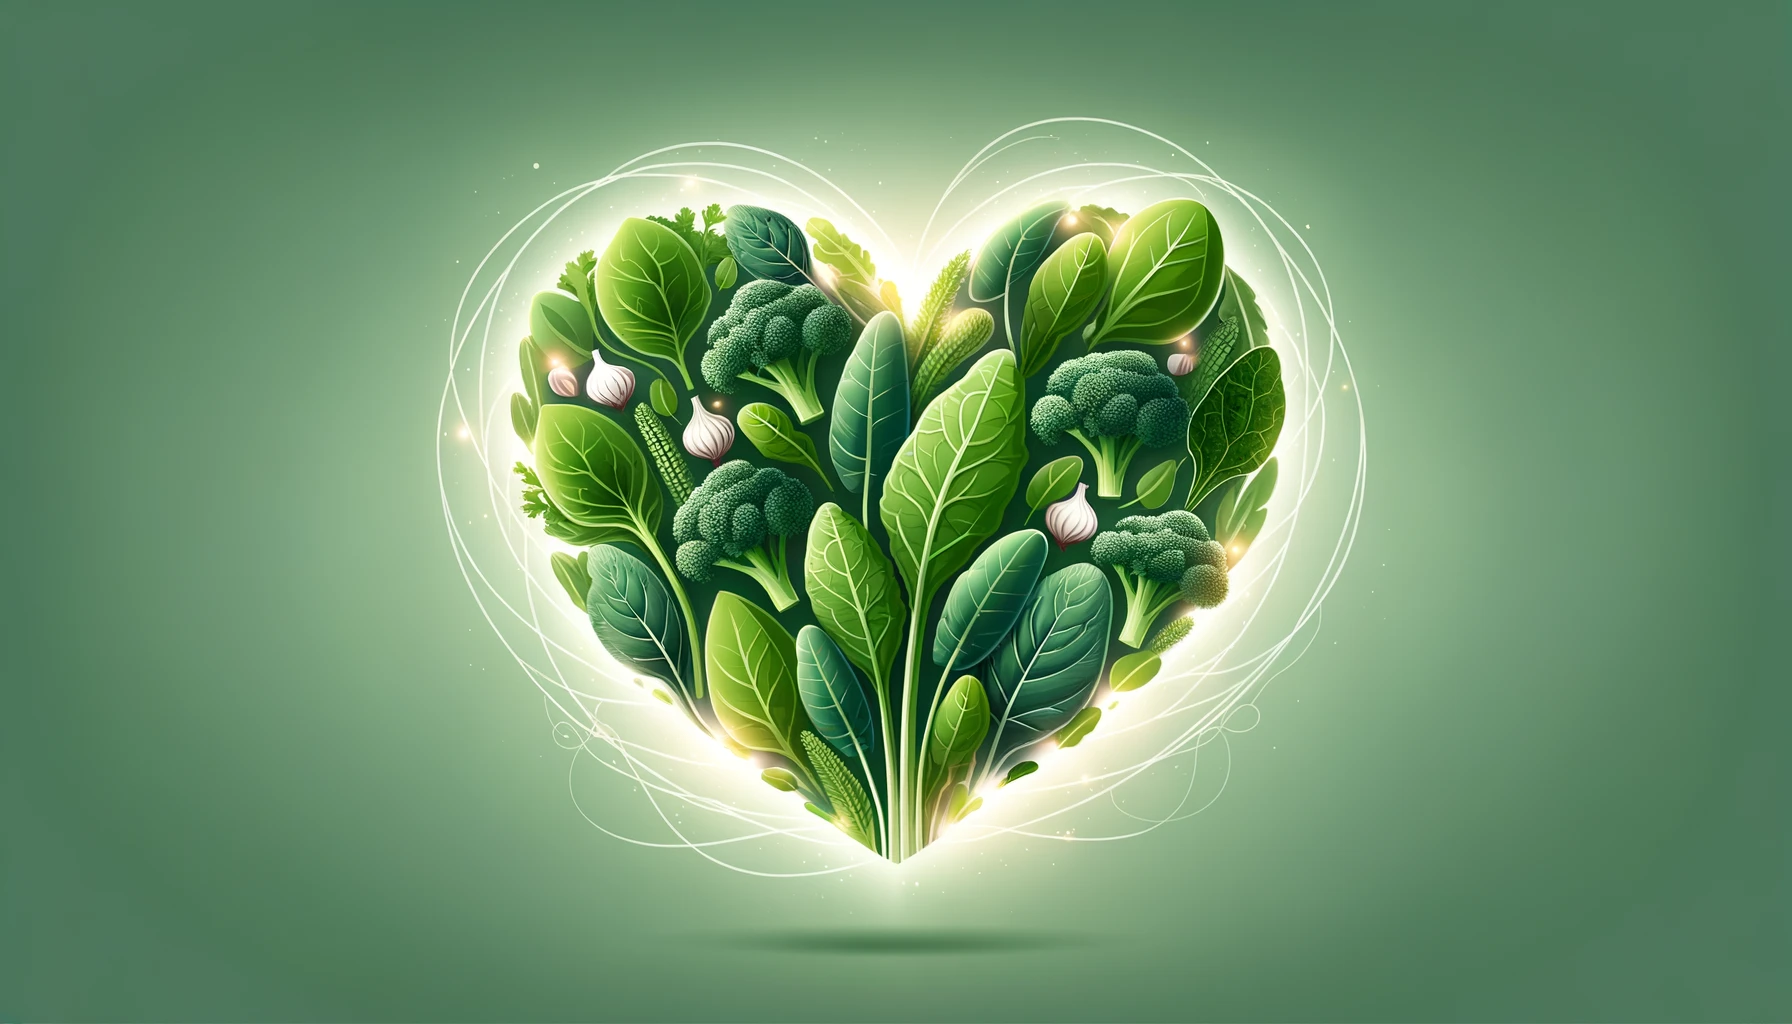 Illustration of a heart intertwined with spinach, kale, and collard greens, glowing with health.